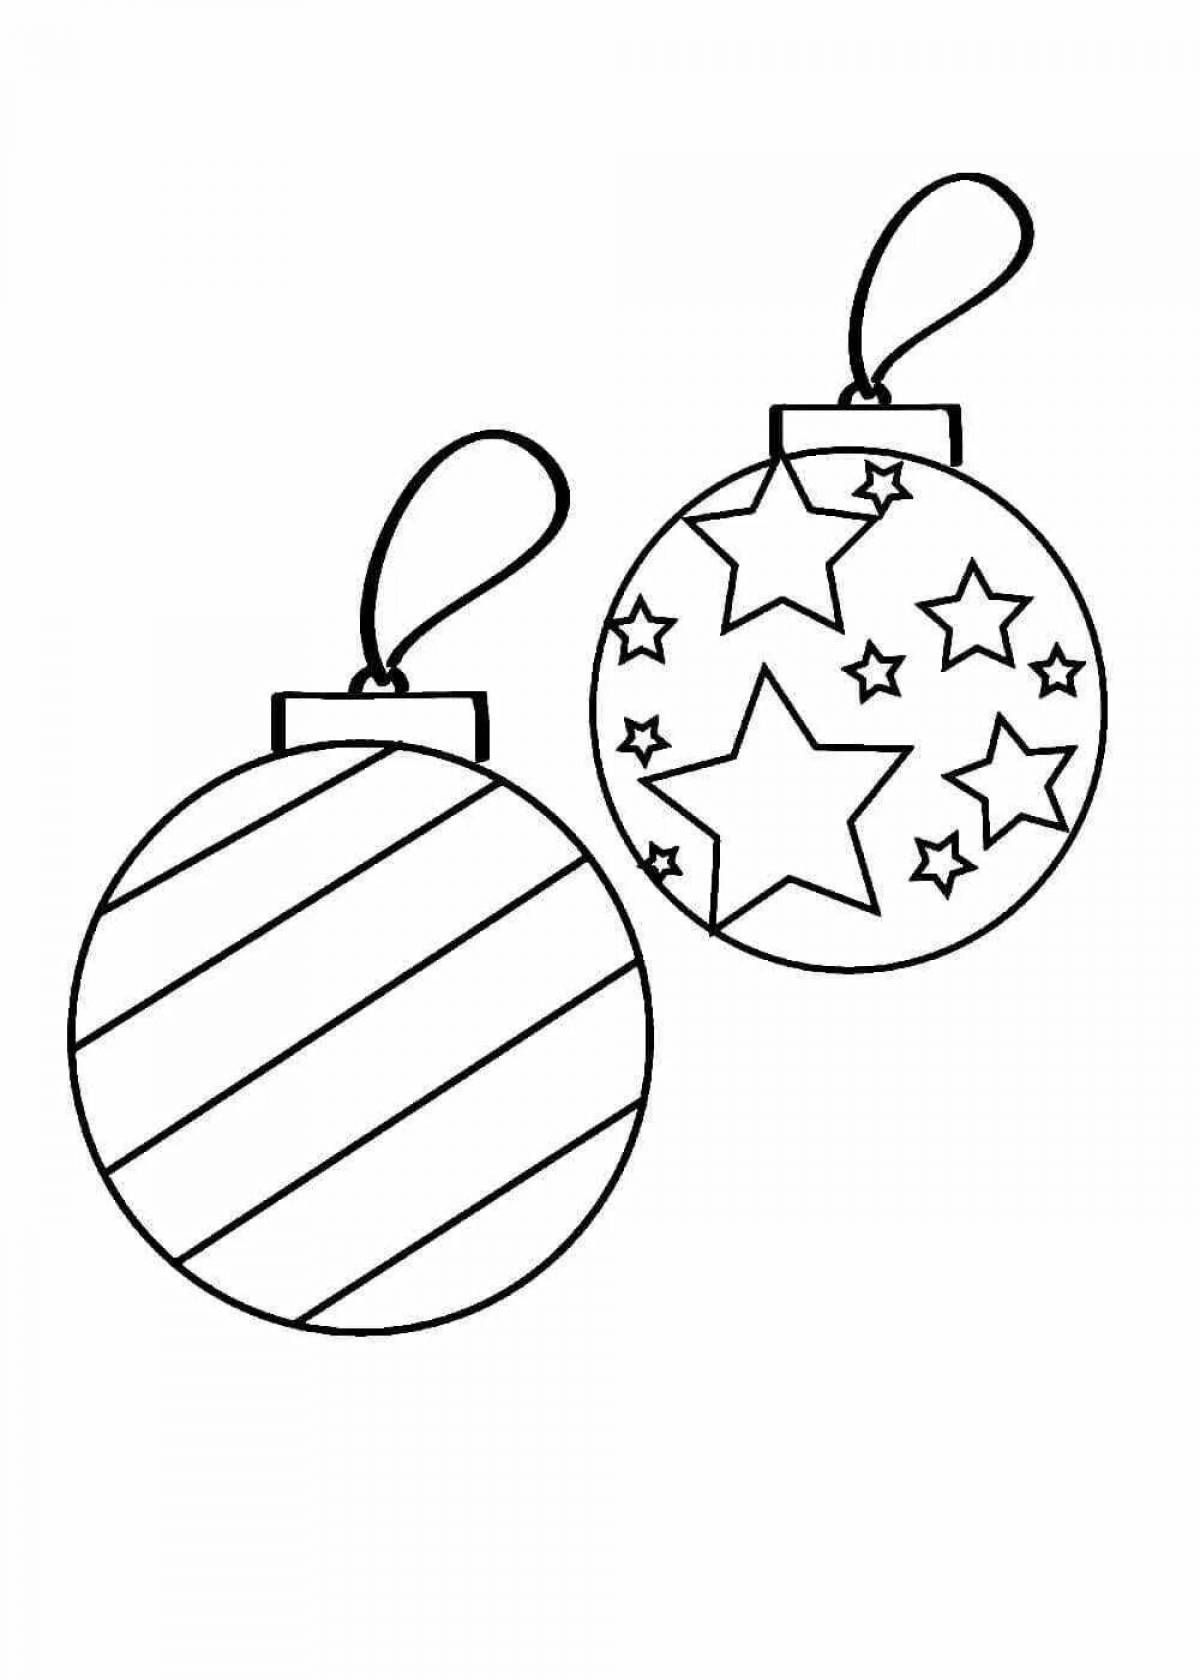 Elegant Christmas toy ball coloring page